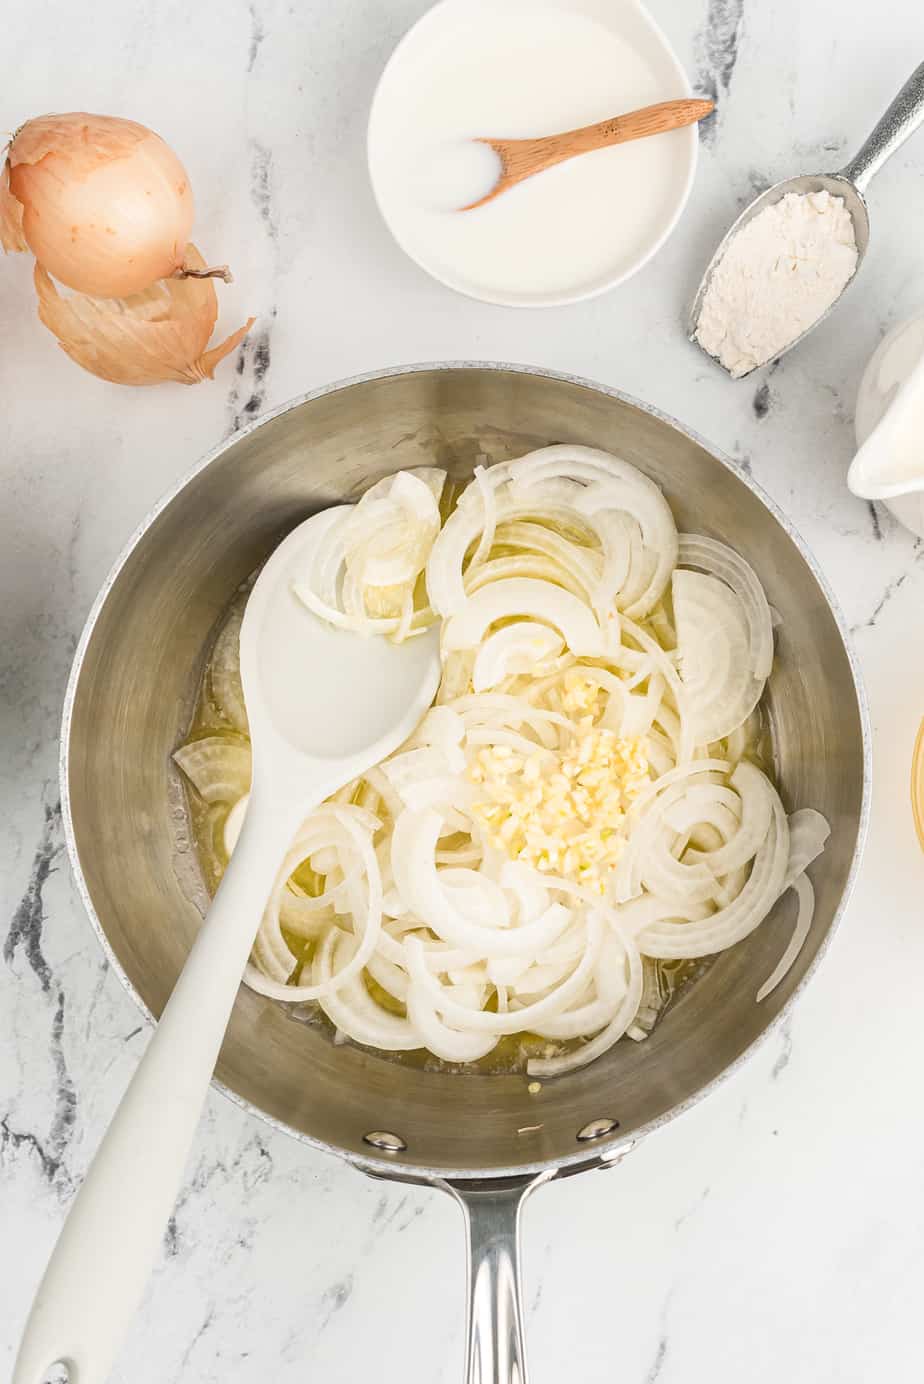 Onion and garlic cooking in a pan with a spoon stirring